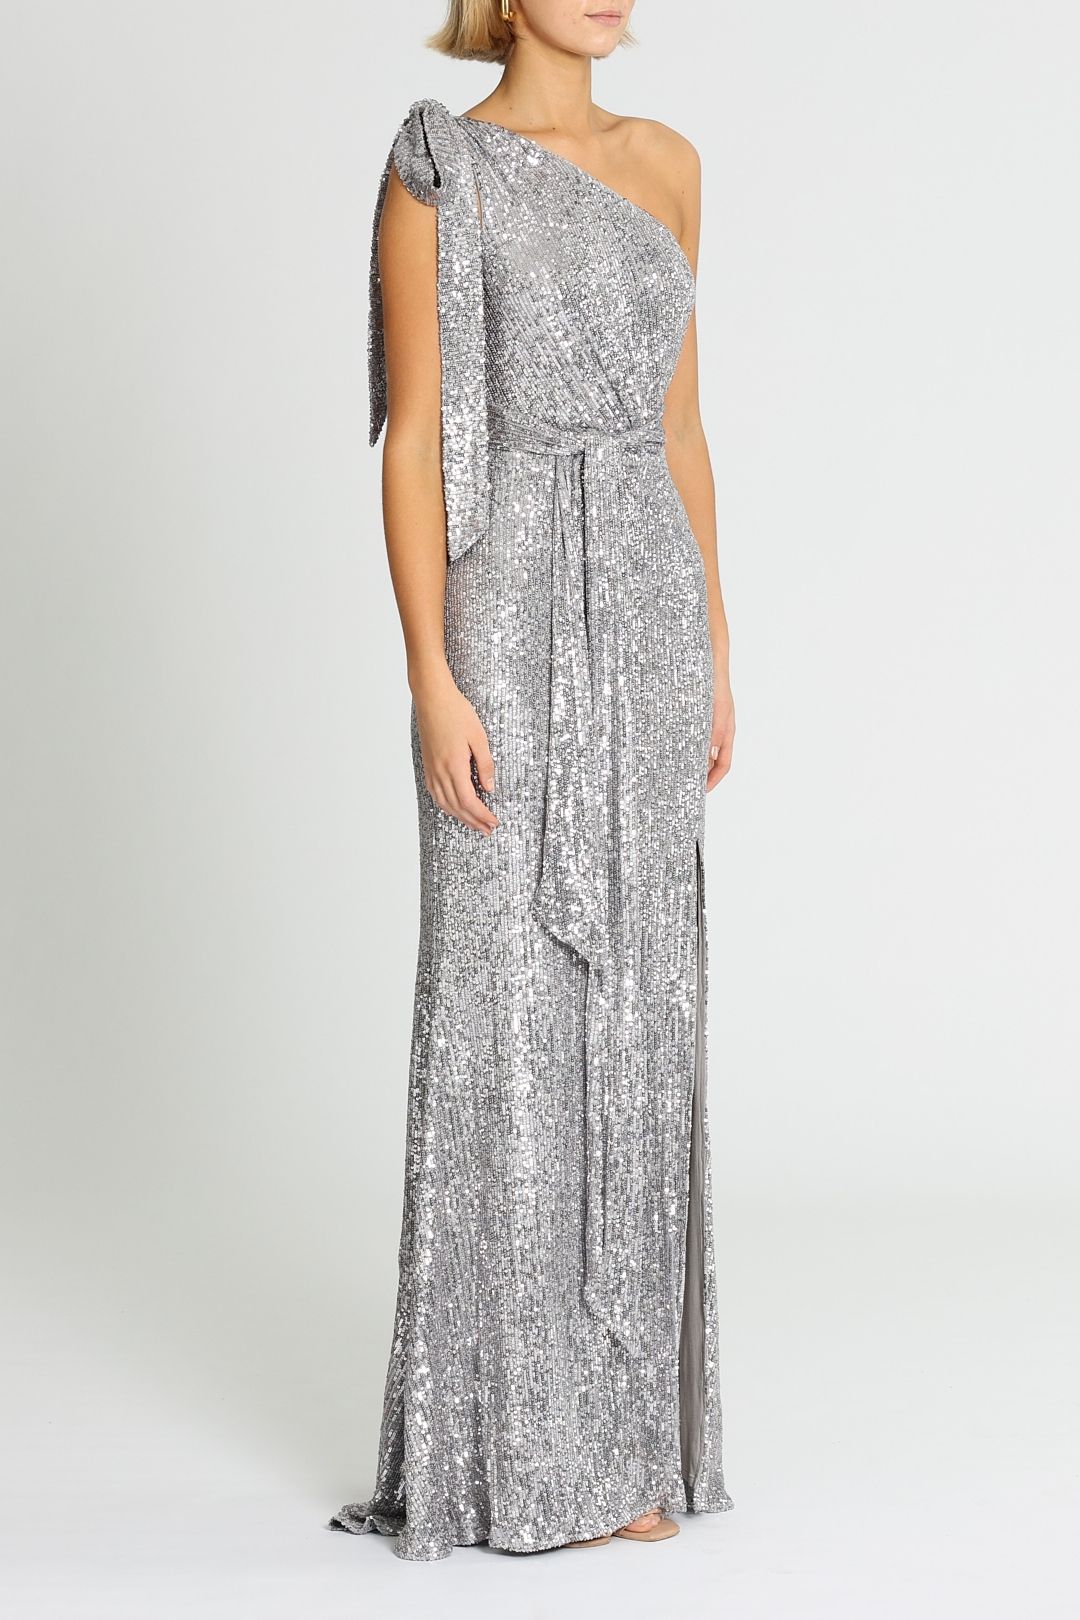 Love Honor Scala Sequin Gown Pewter One Shoulder